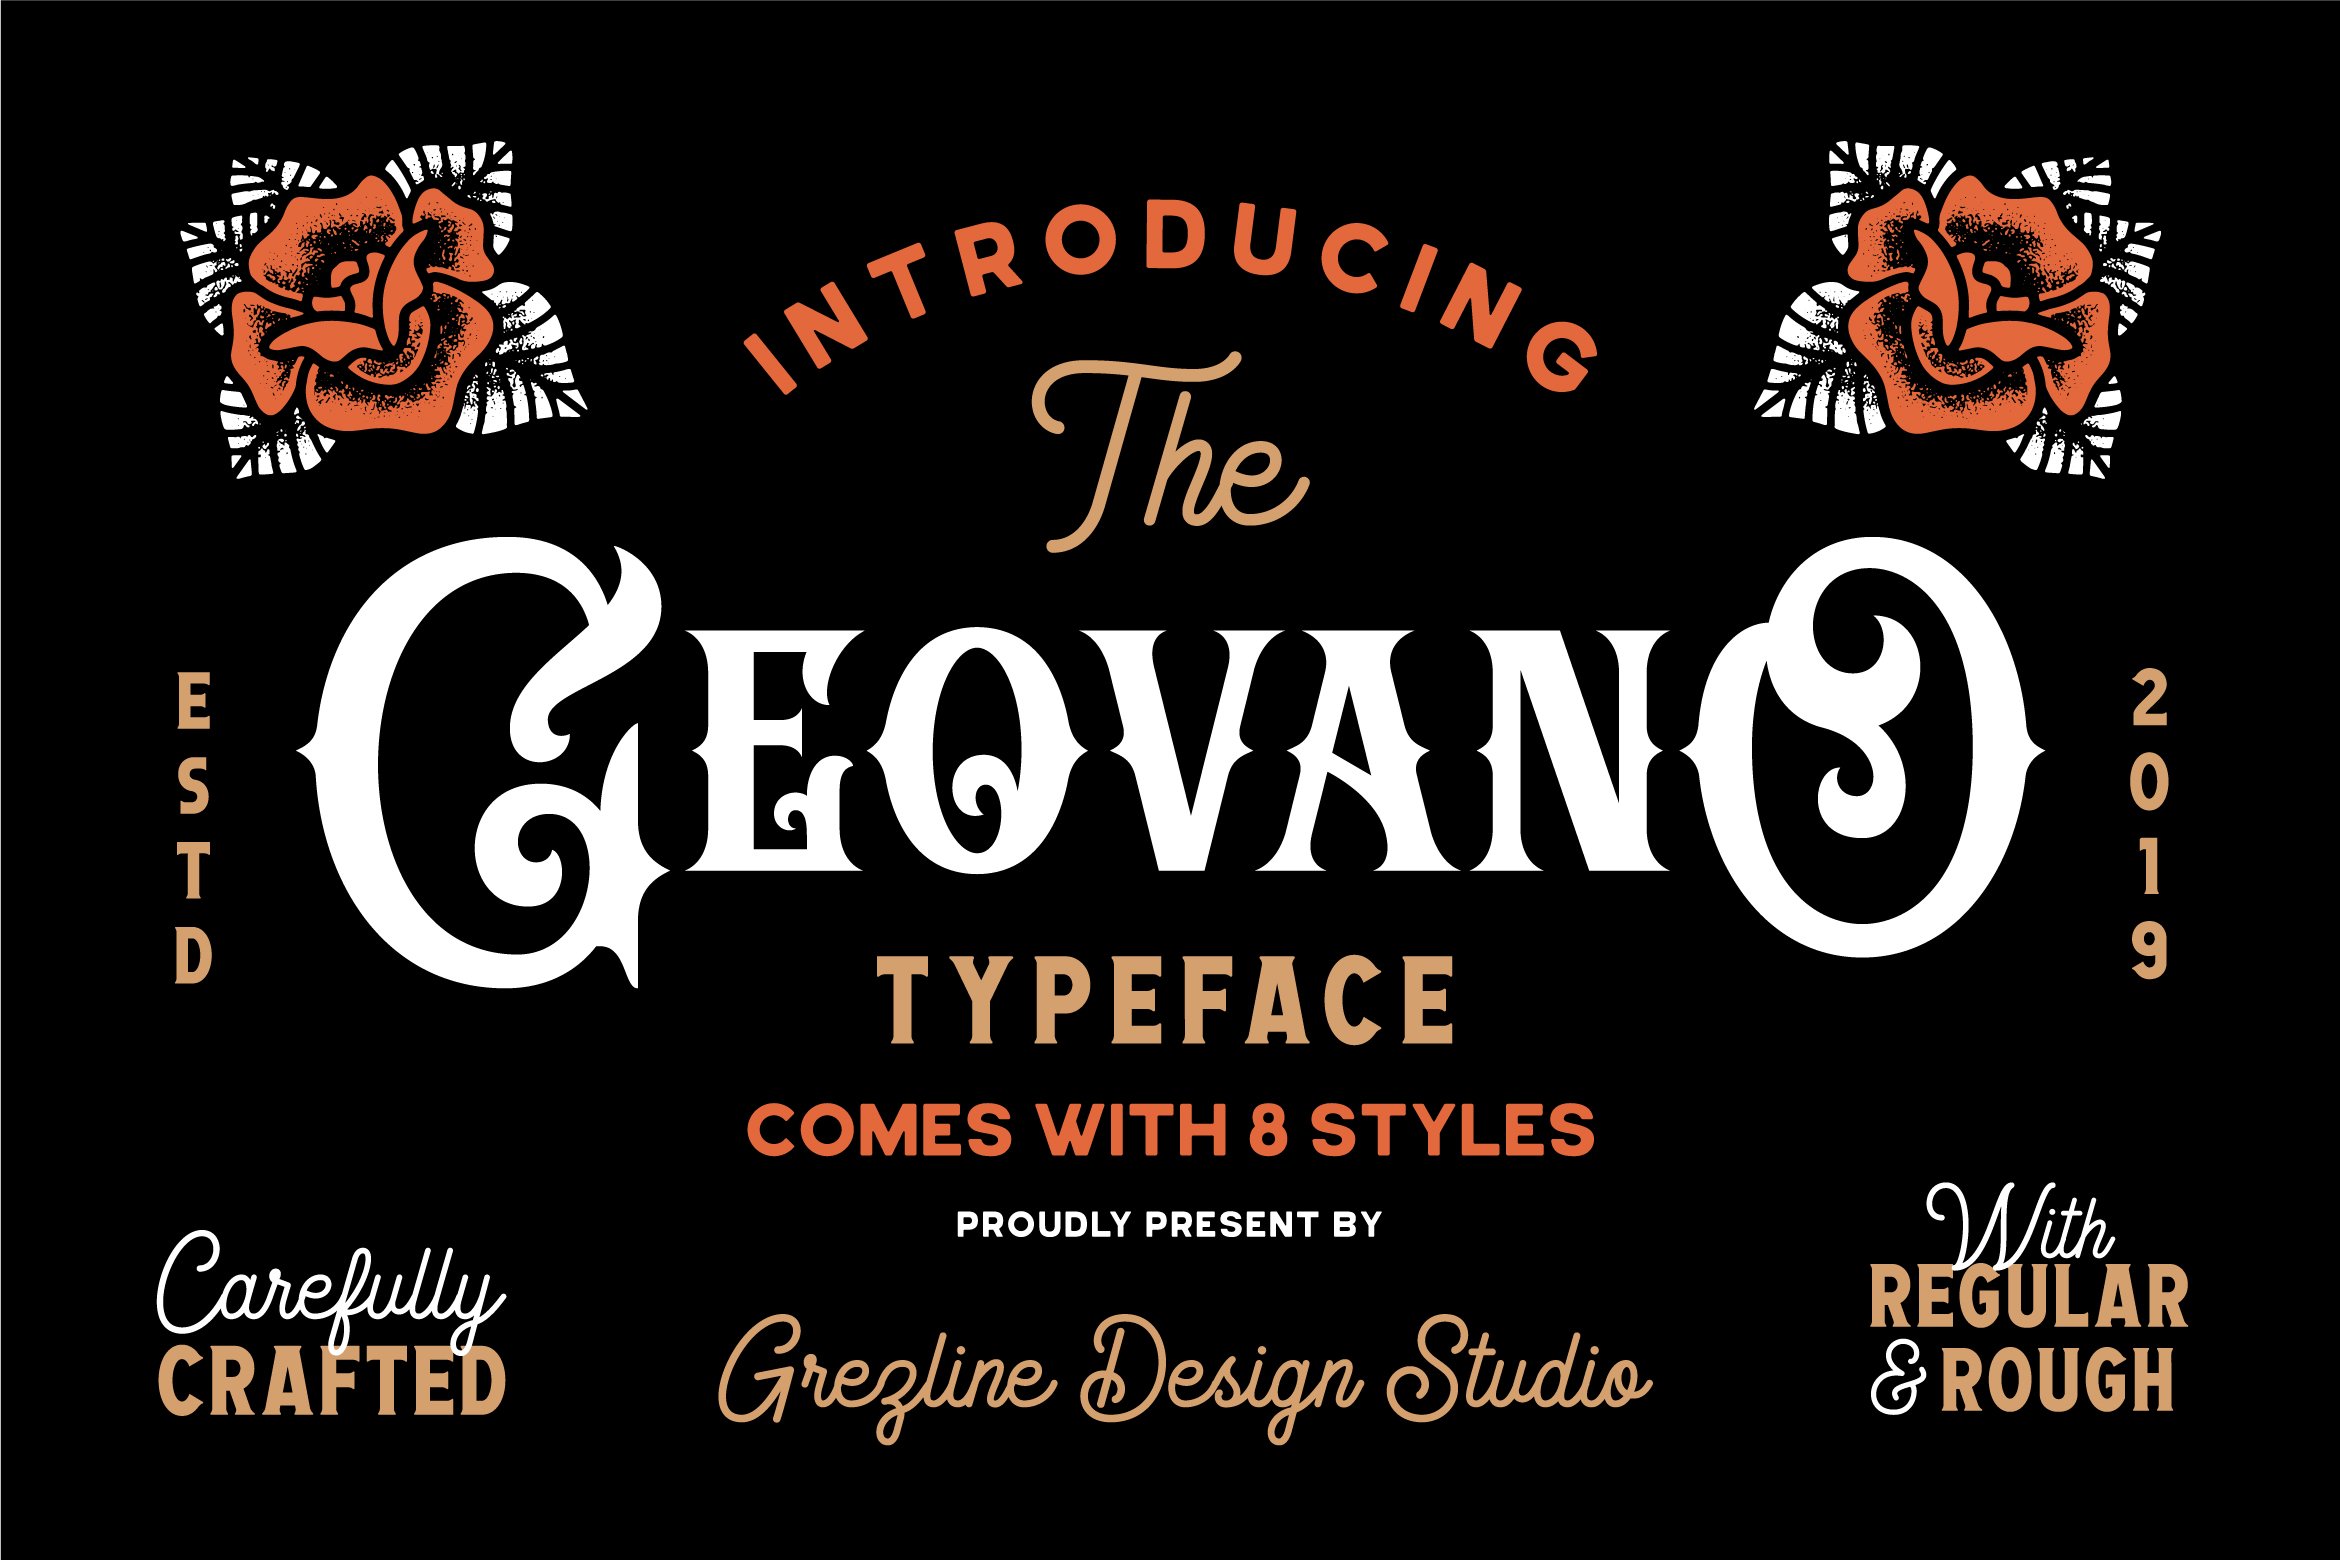 Geovano - Vintage Font Family cover image.